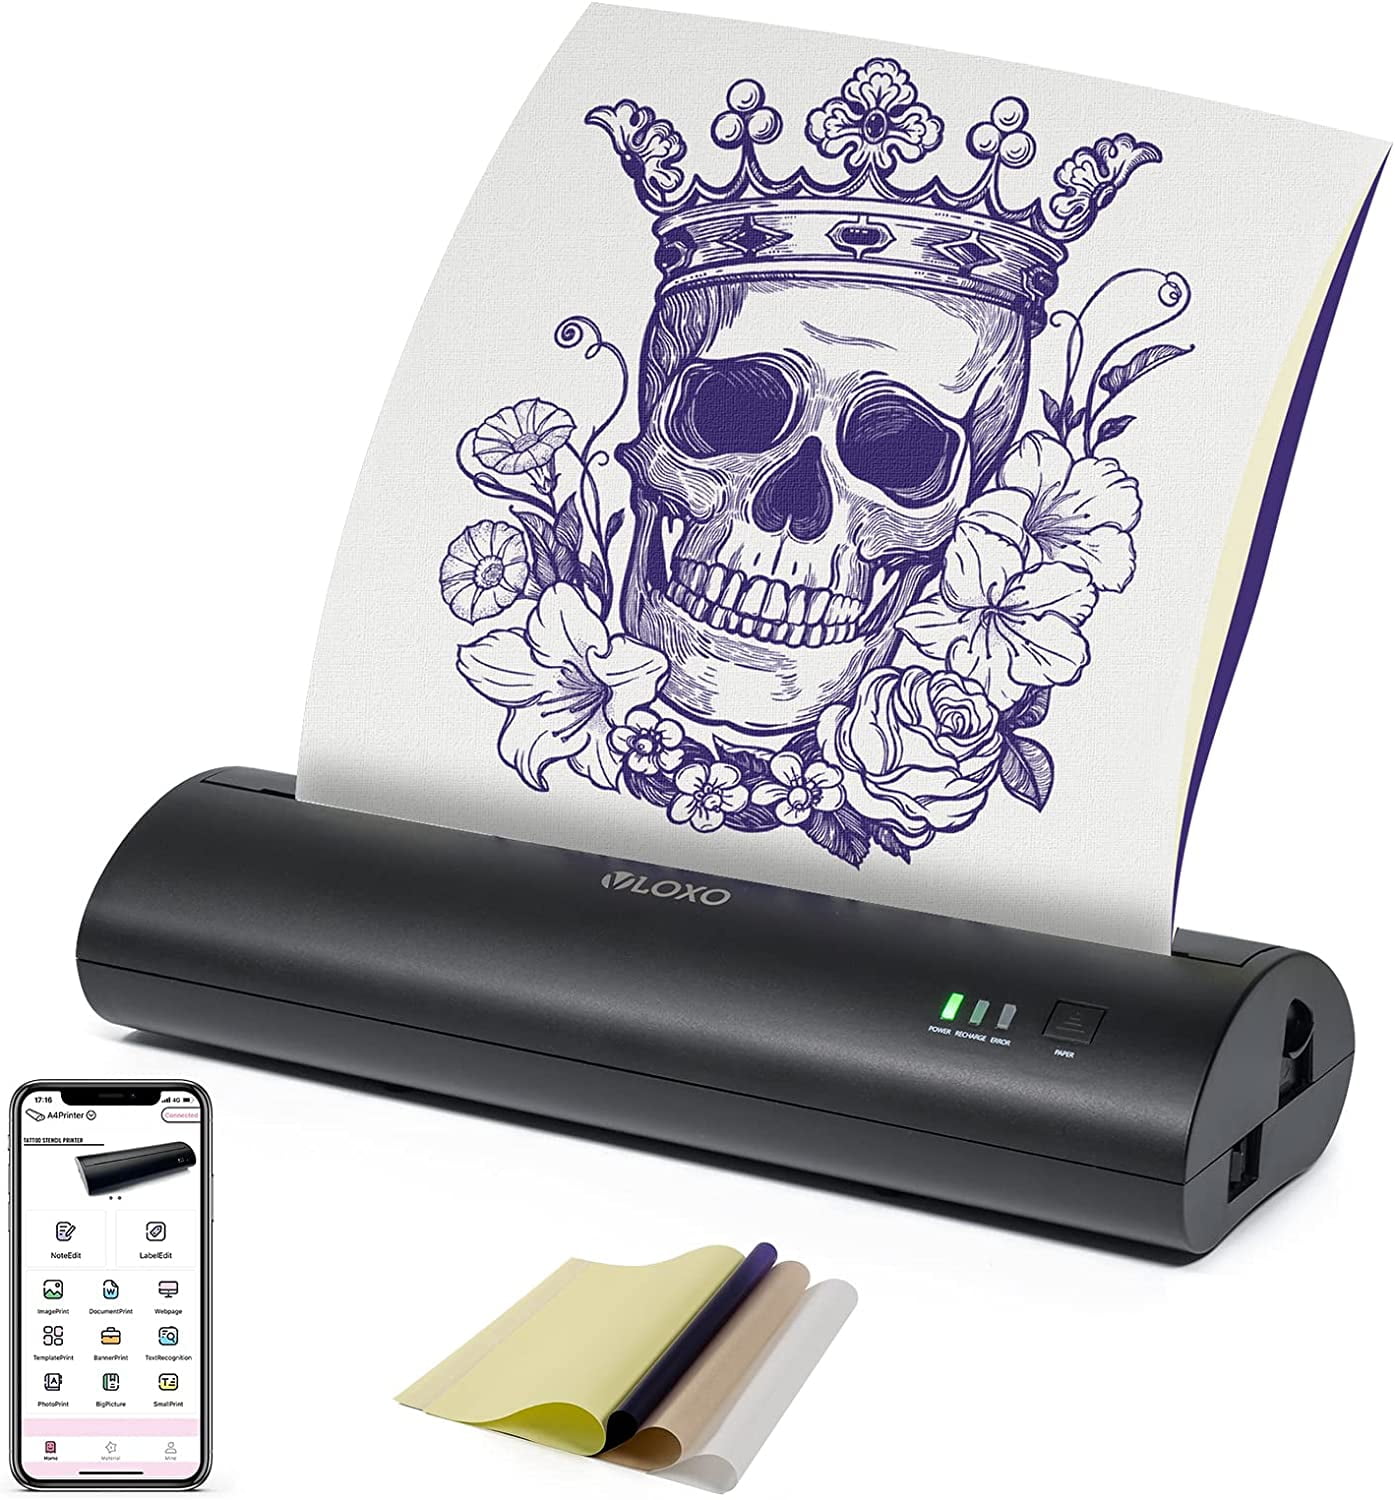 Thermocopier for Stencils  TRACING, STENCIL AND THERMAL COPIERS - ARTE  SANO TATTOO SUPPLIES